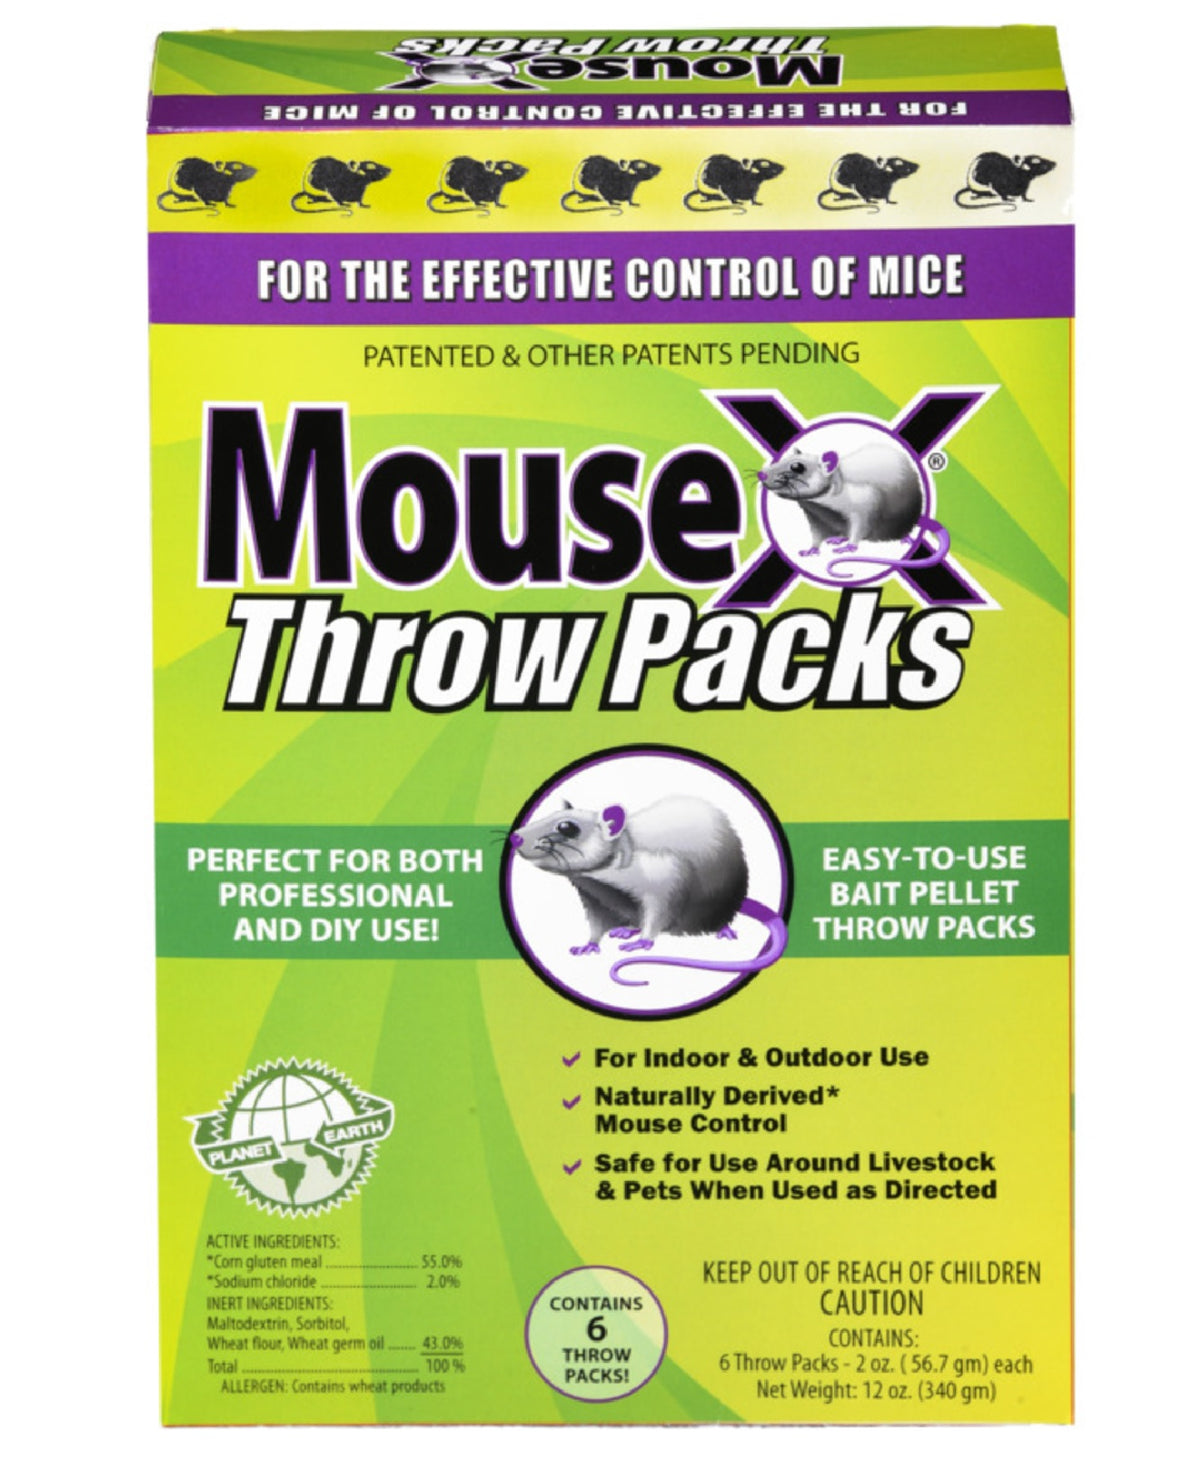 MouseX 620206 Throw Packs Bait Pellets For Mice, Pack of 6